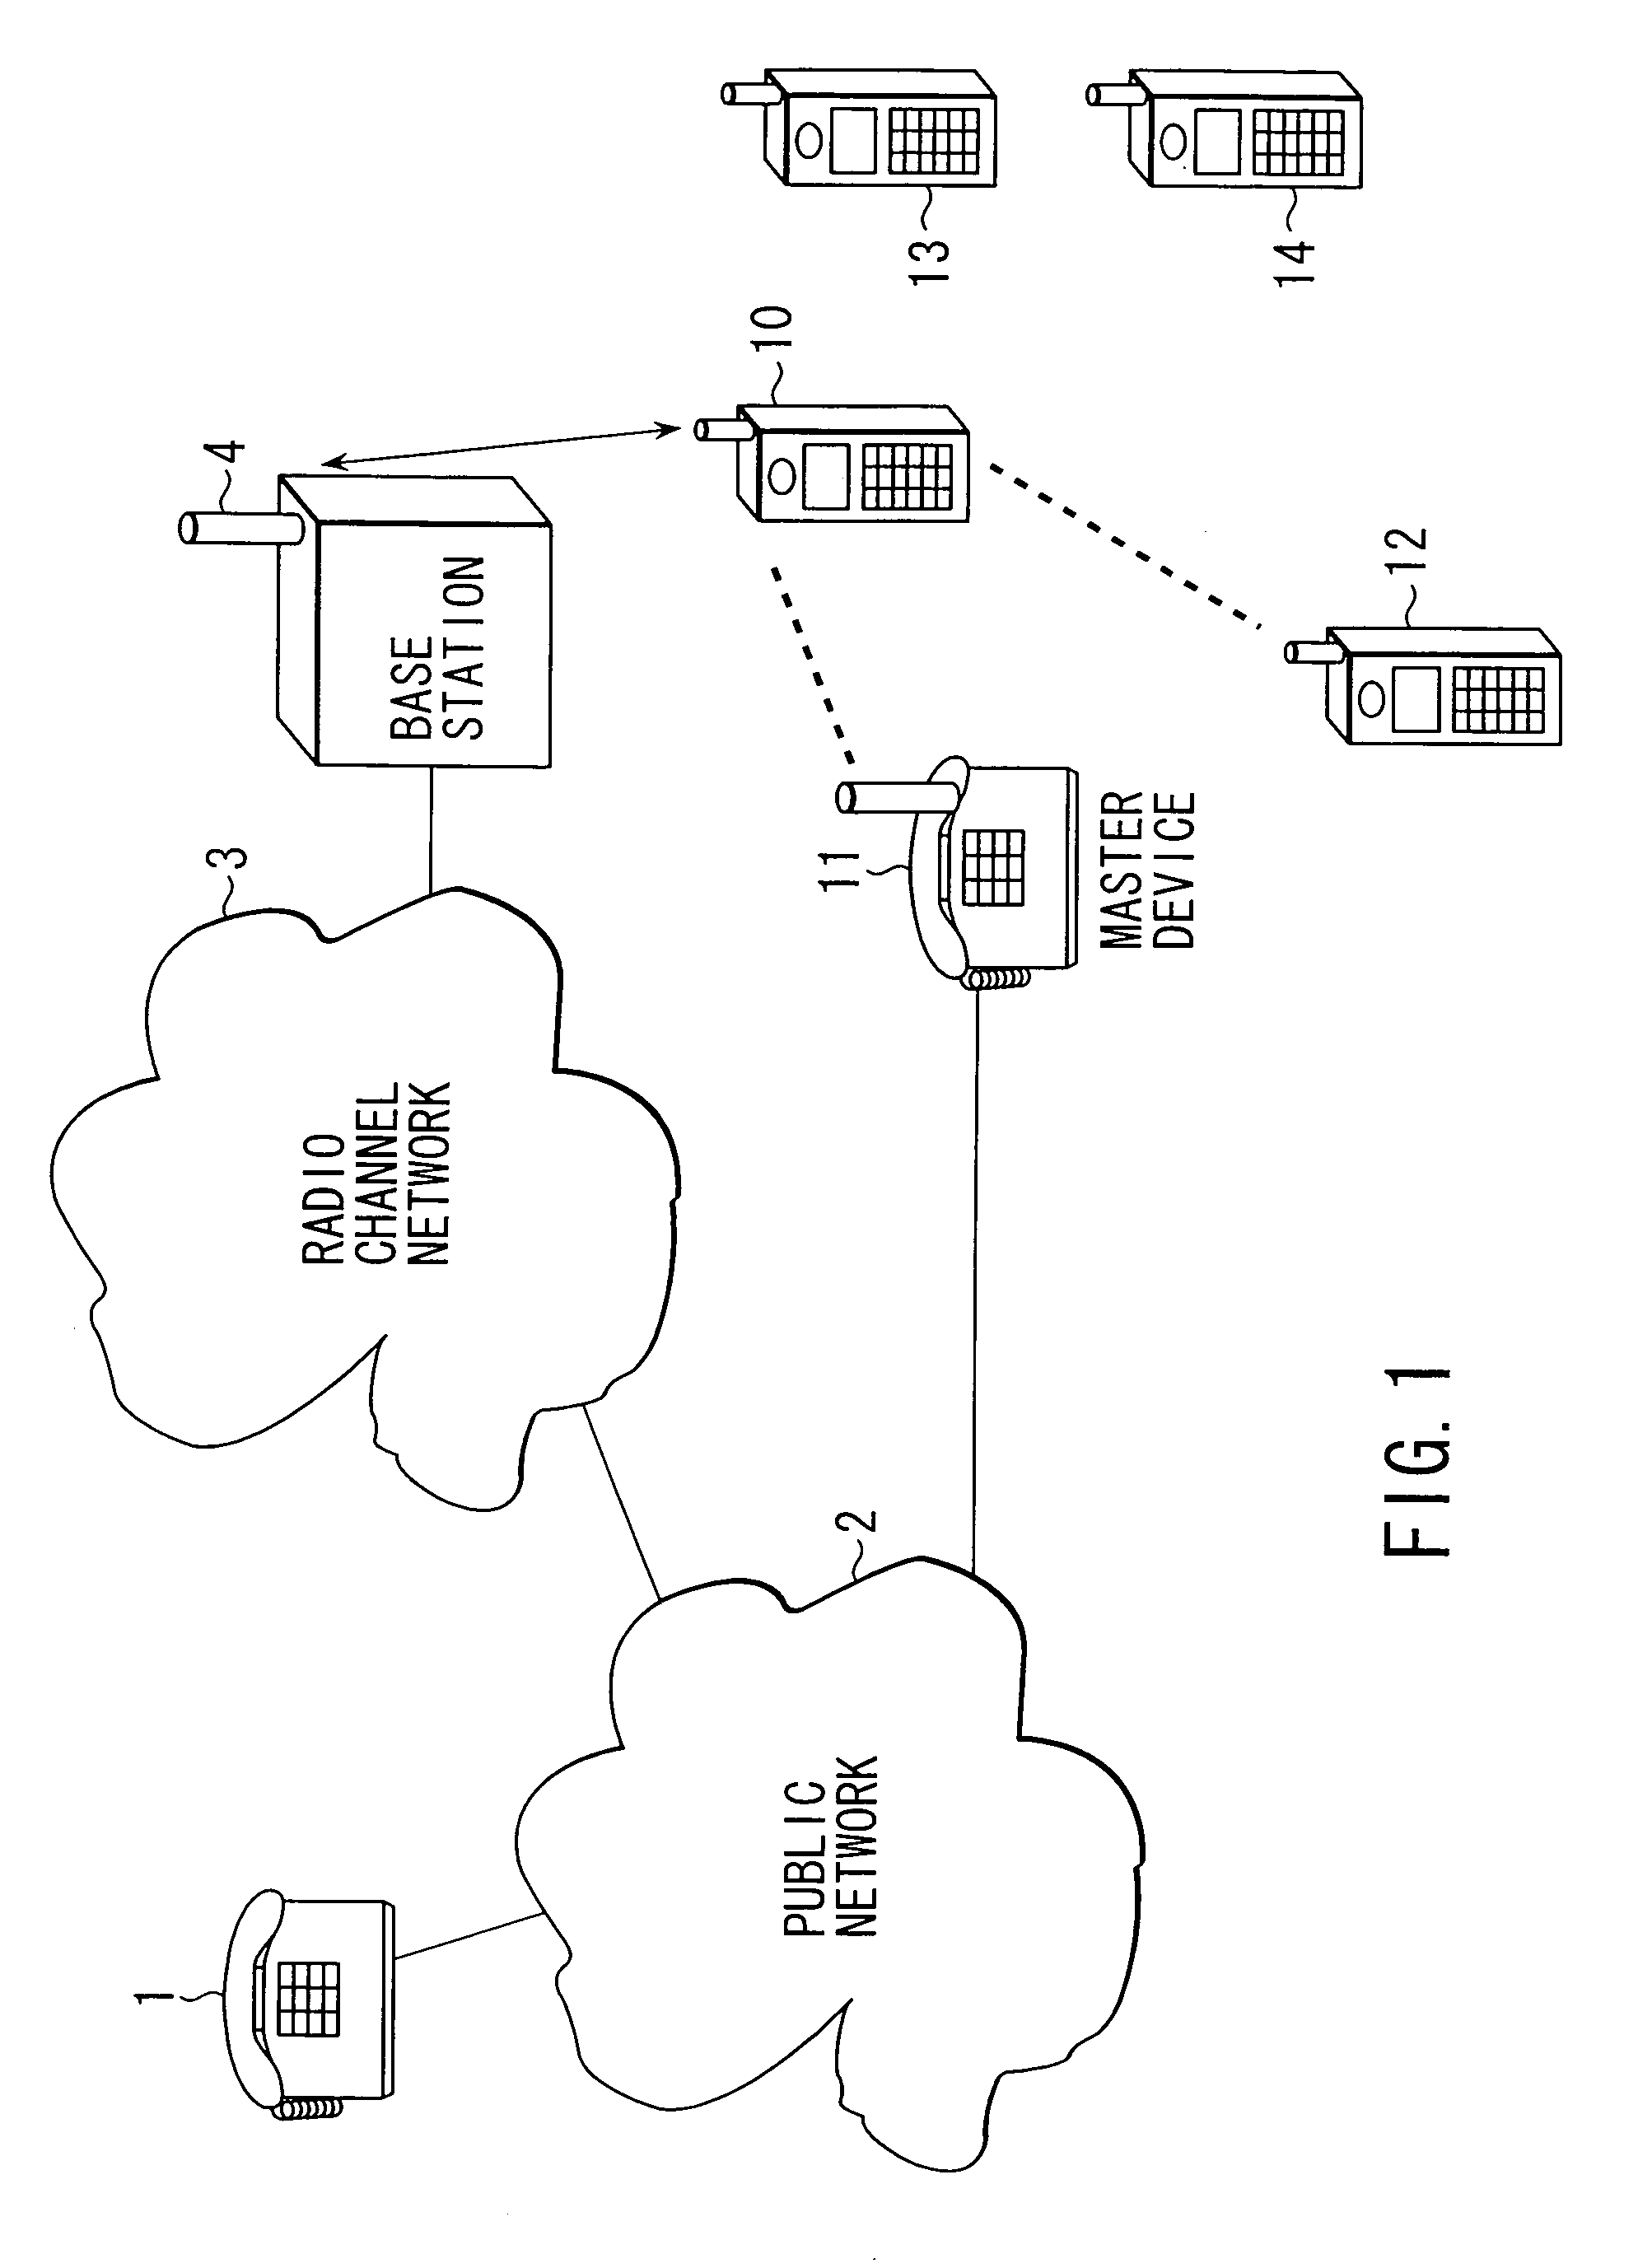 Communication terminal and channel connection